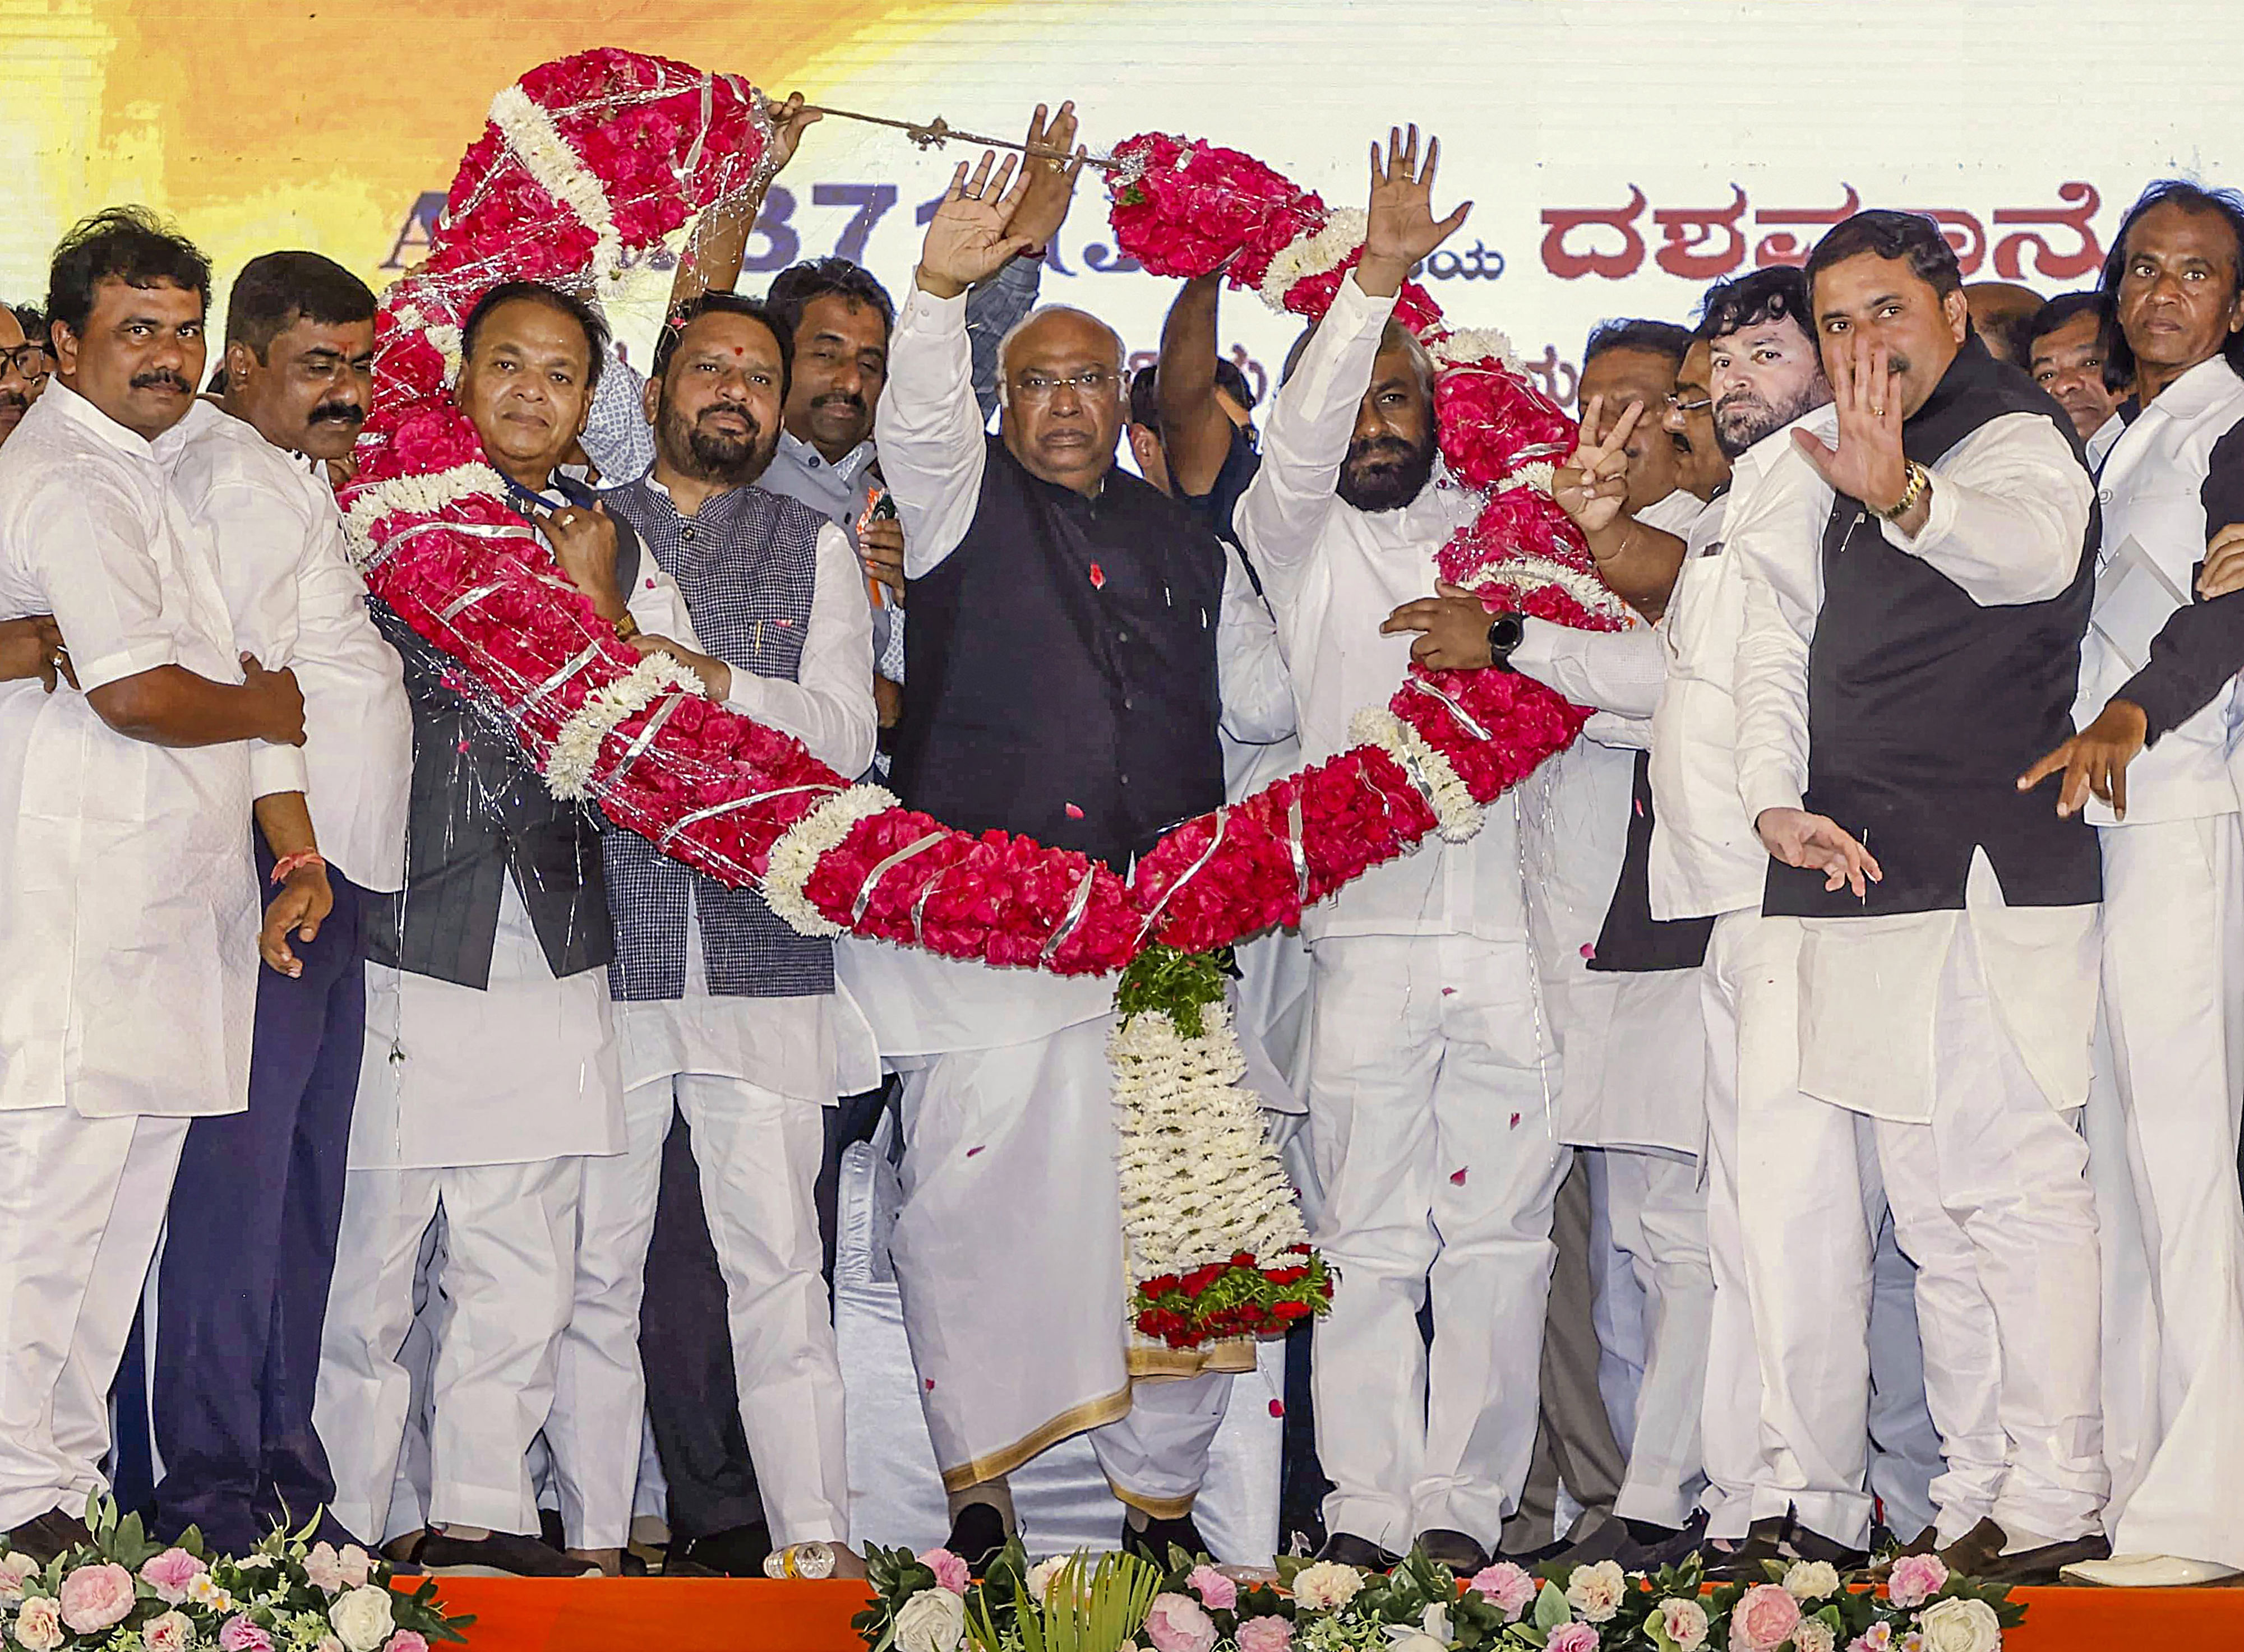 some congress leaders 'running towards' bjp as they fear ed and modi, says party chief kharge